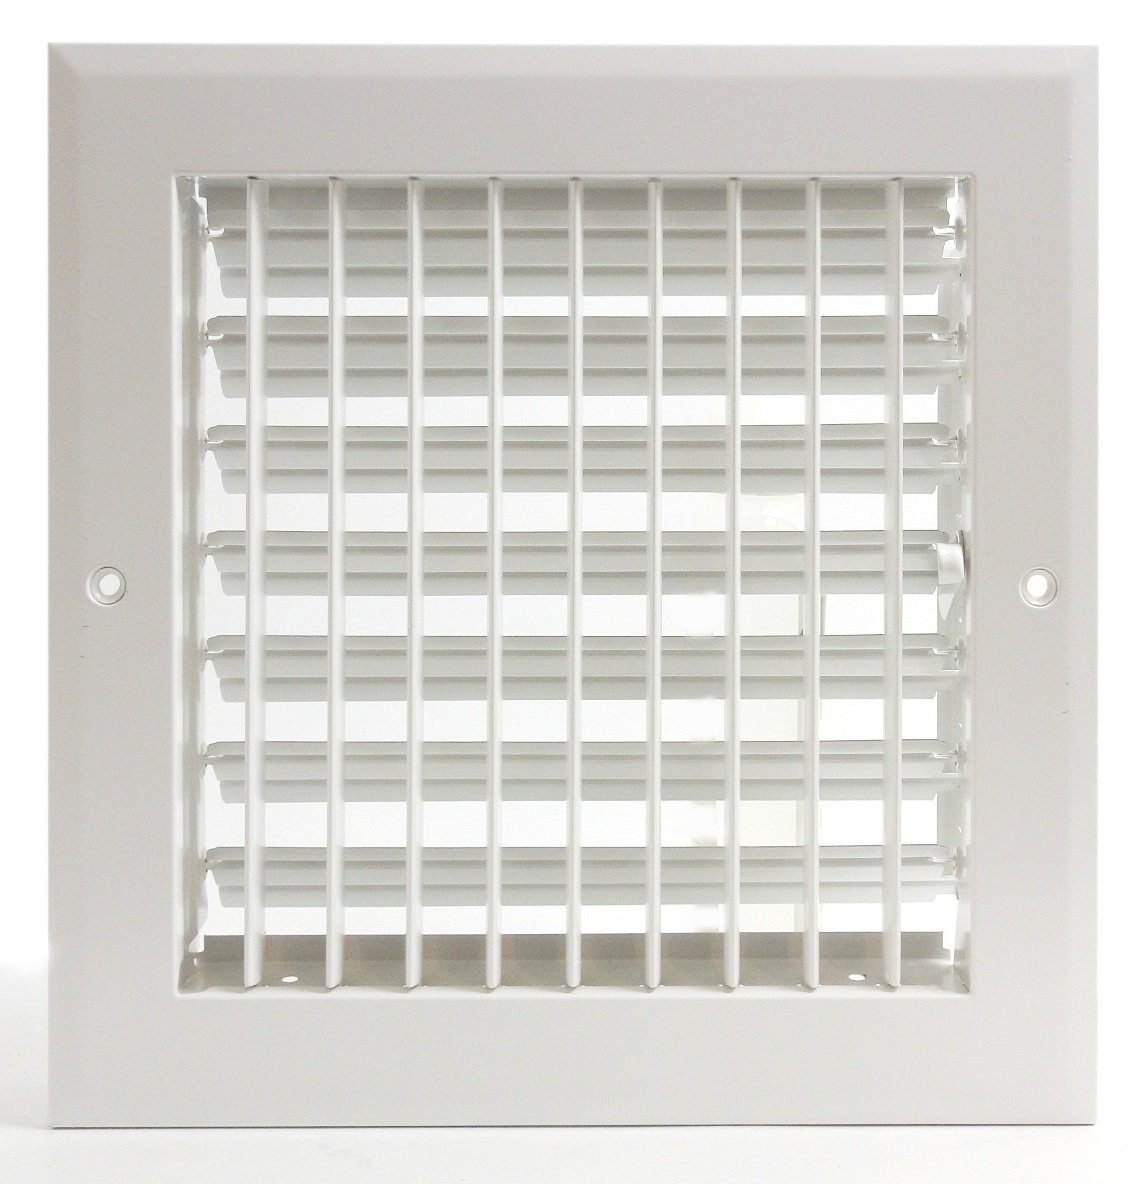 6&quot; X 6&quot; ADJUSTABLE AIR SUPPLY DIFFUSER - HVAC Vent Duct Cover Sidewall or Ceiling